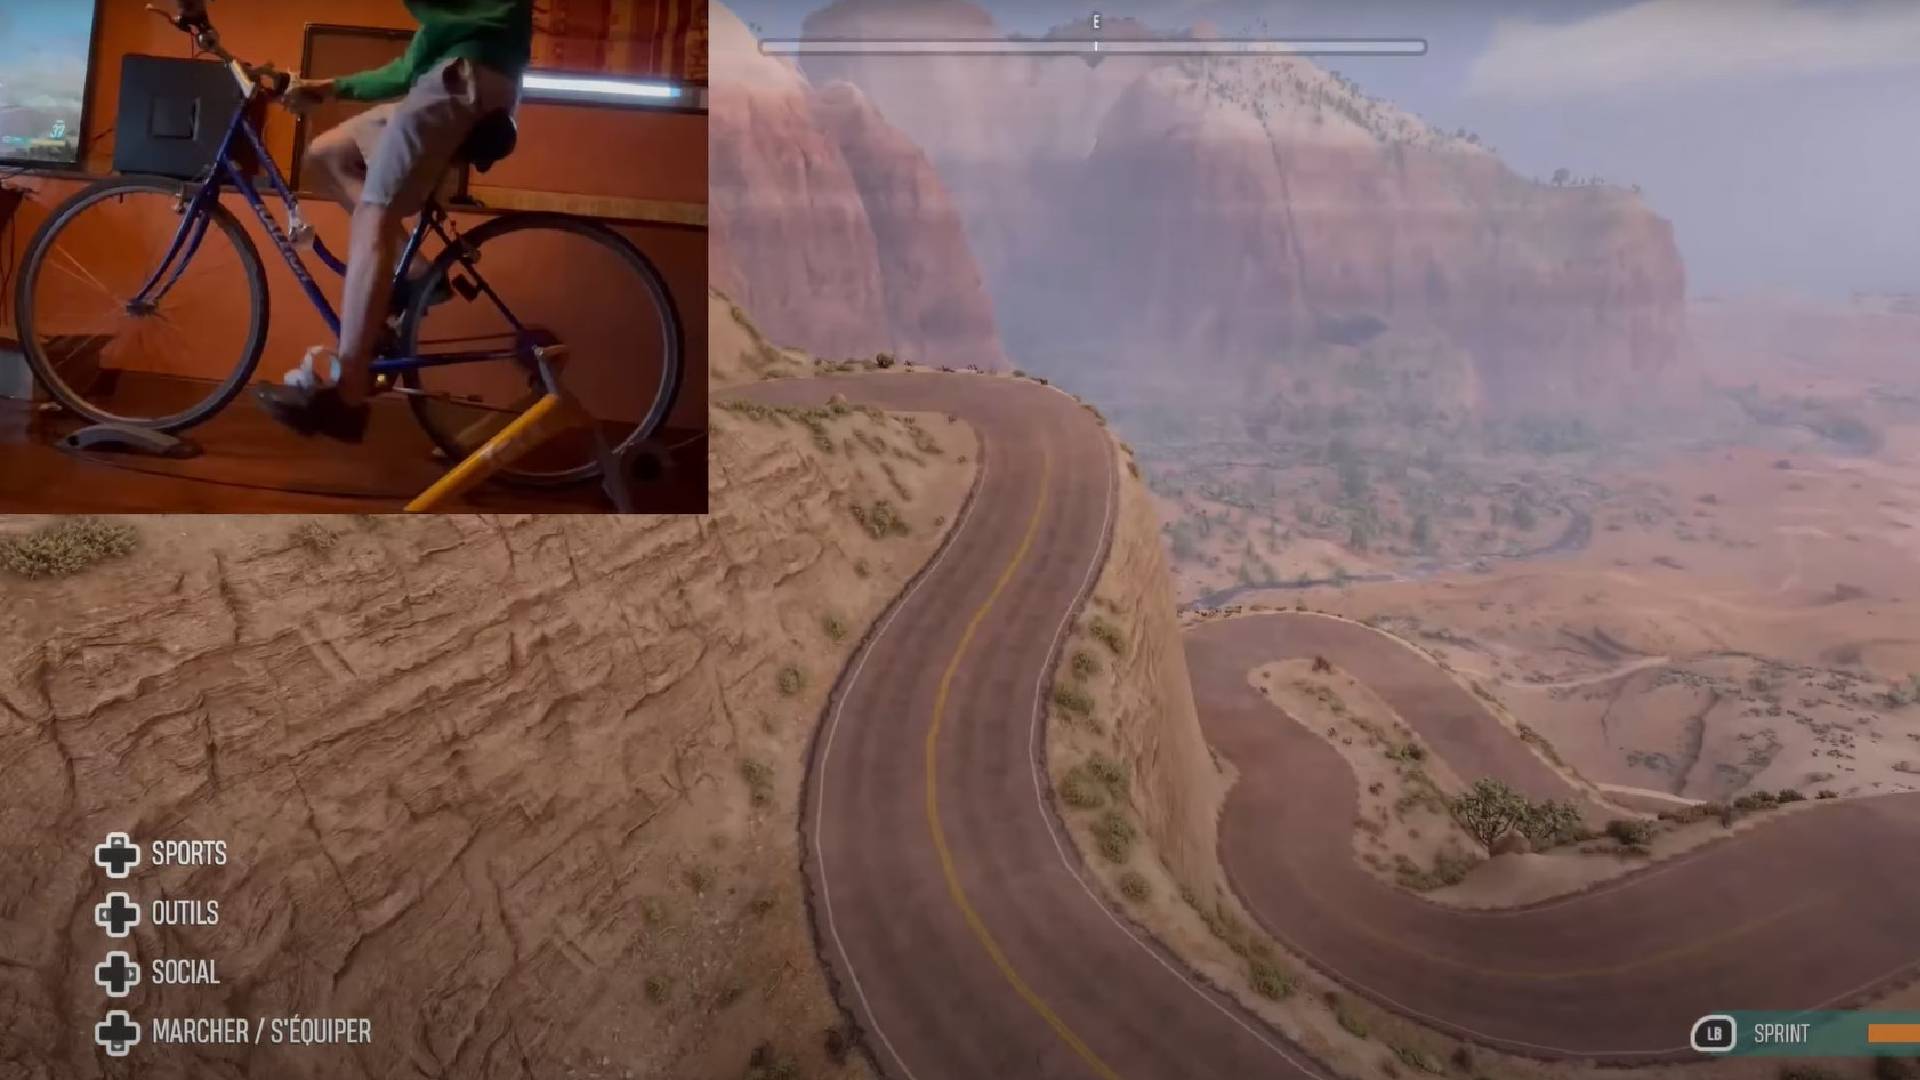 Biking in VR: This app makes it possible